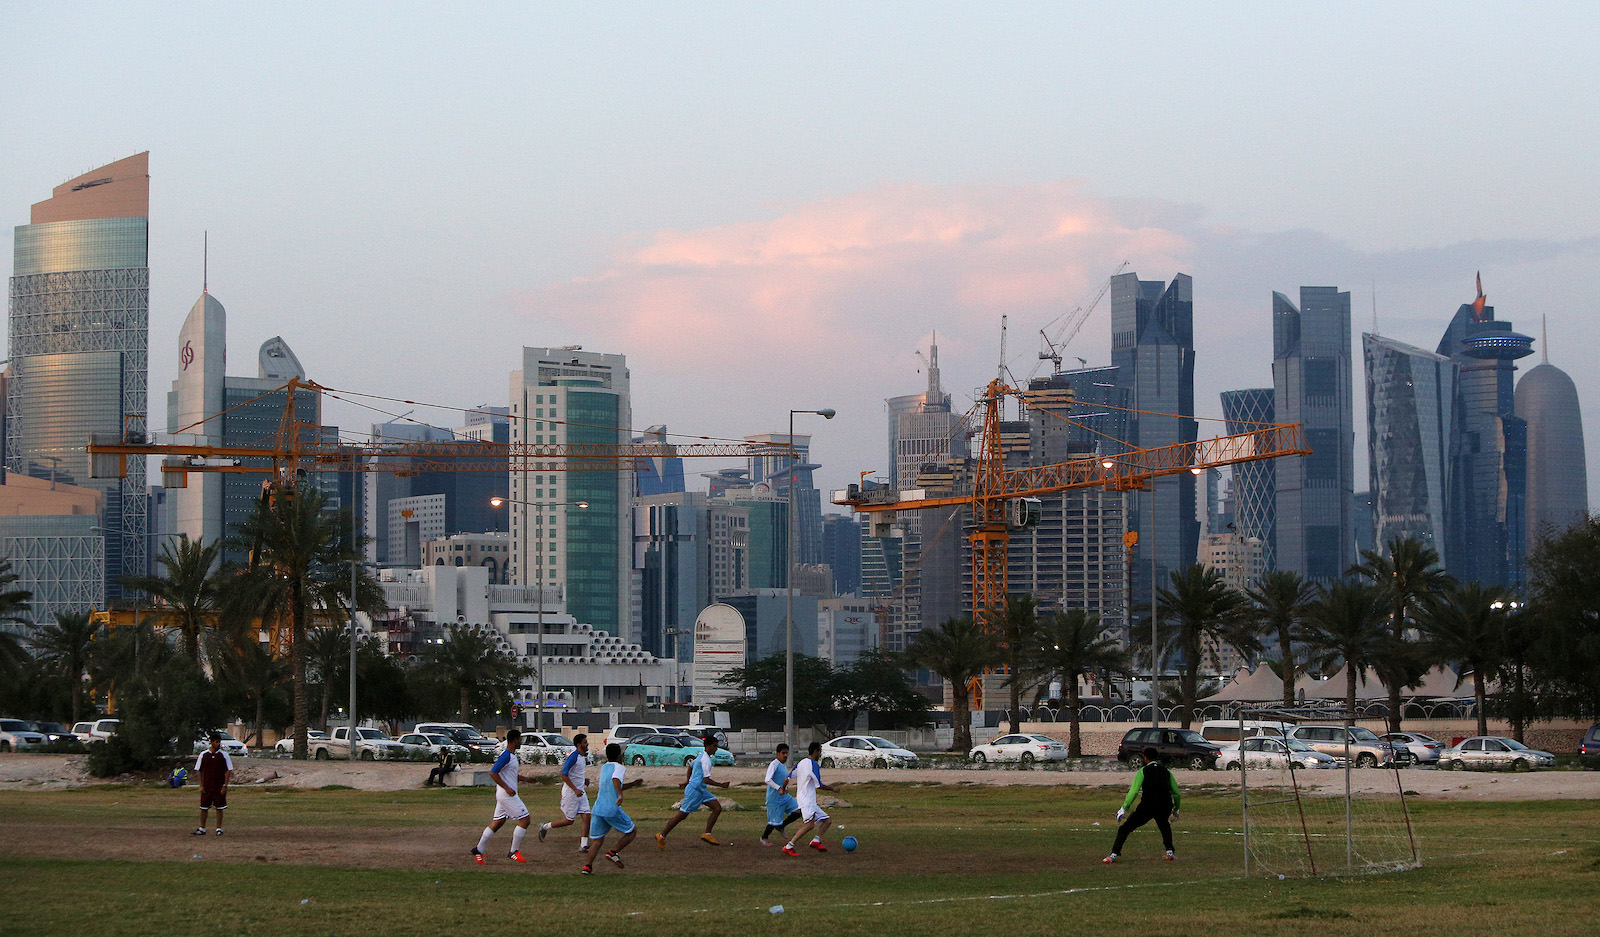 People playing soccer under a skyline punctuated by construction cranes